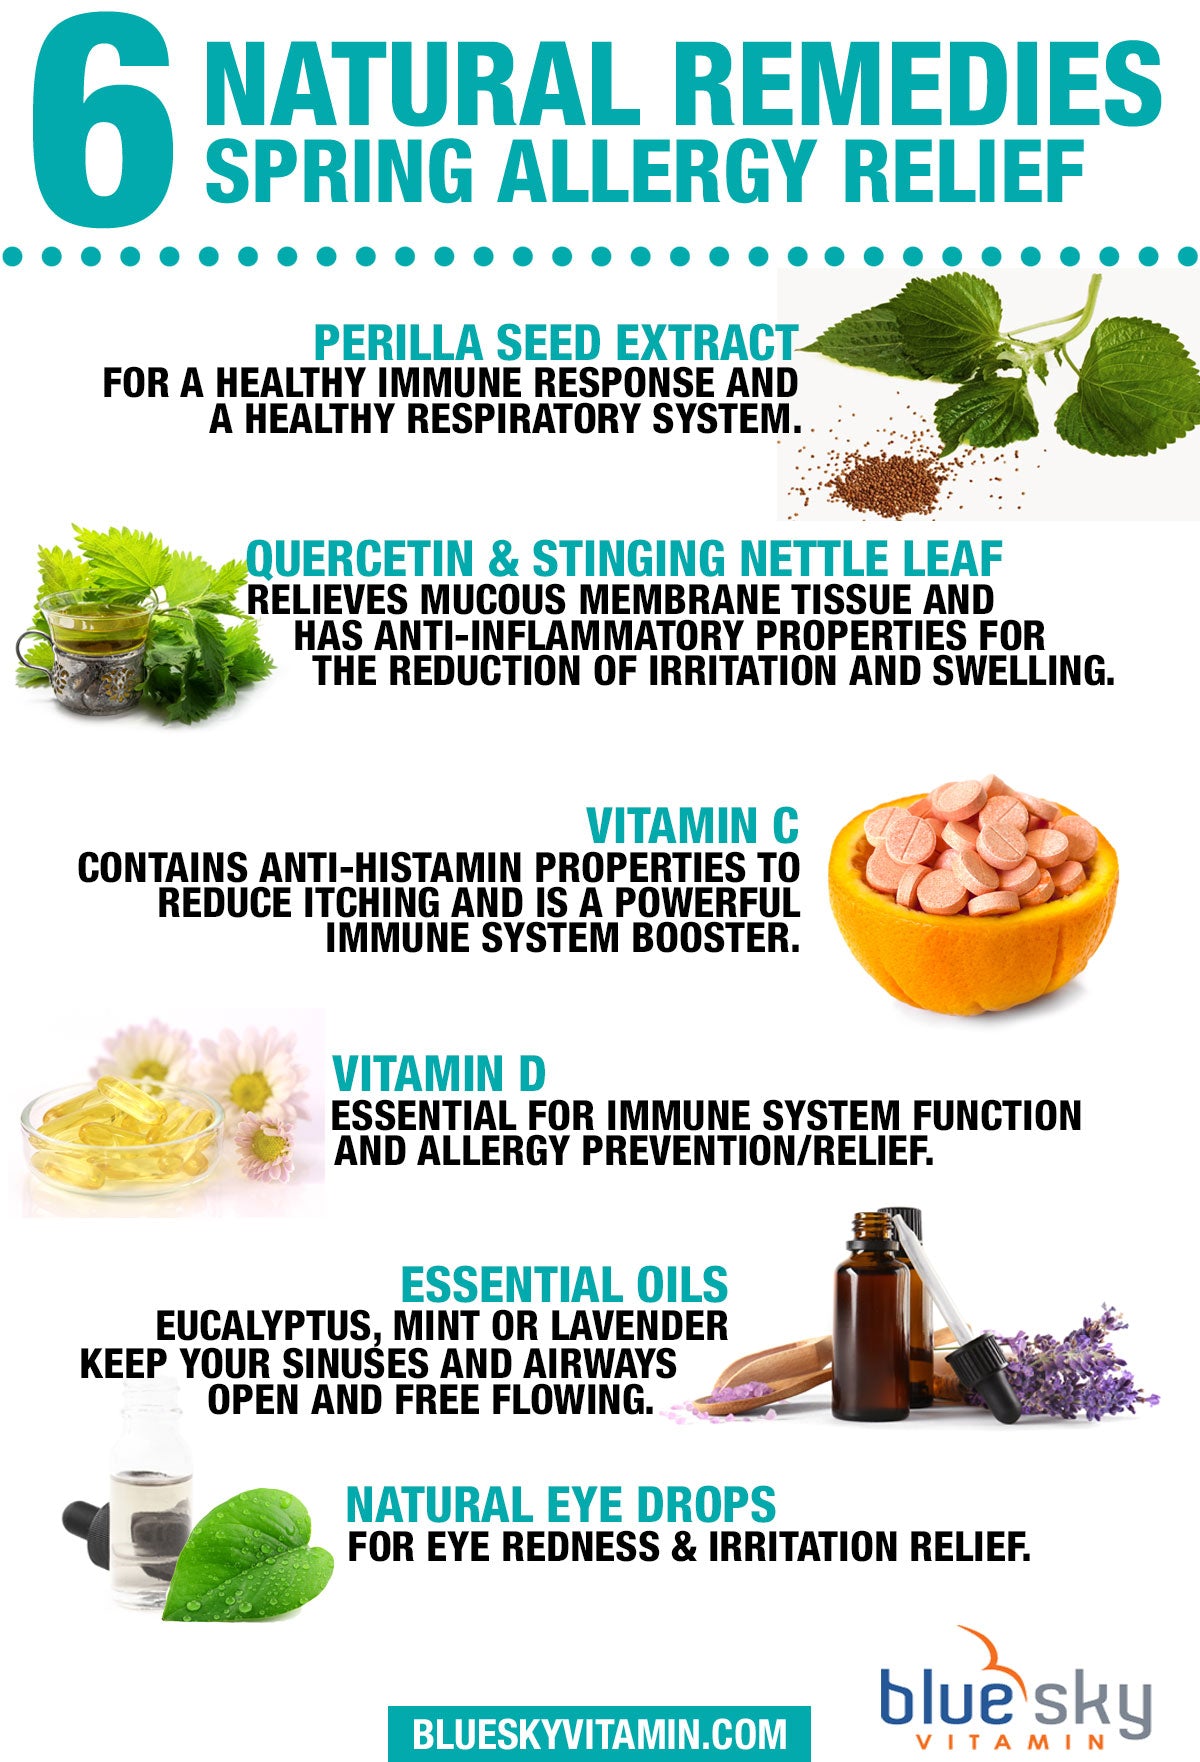 6 Natural Remedies for Spring Allergy Relief Infographic